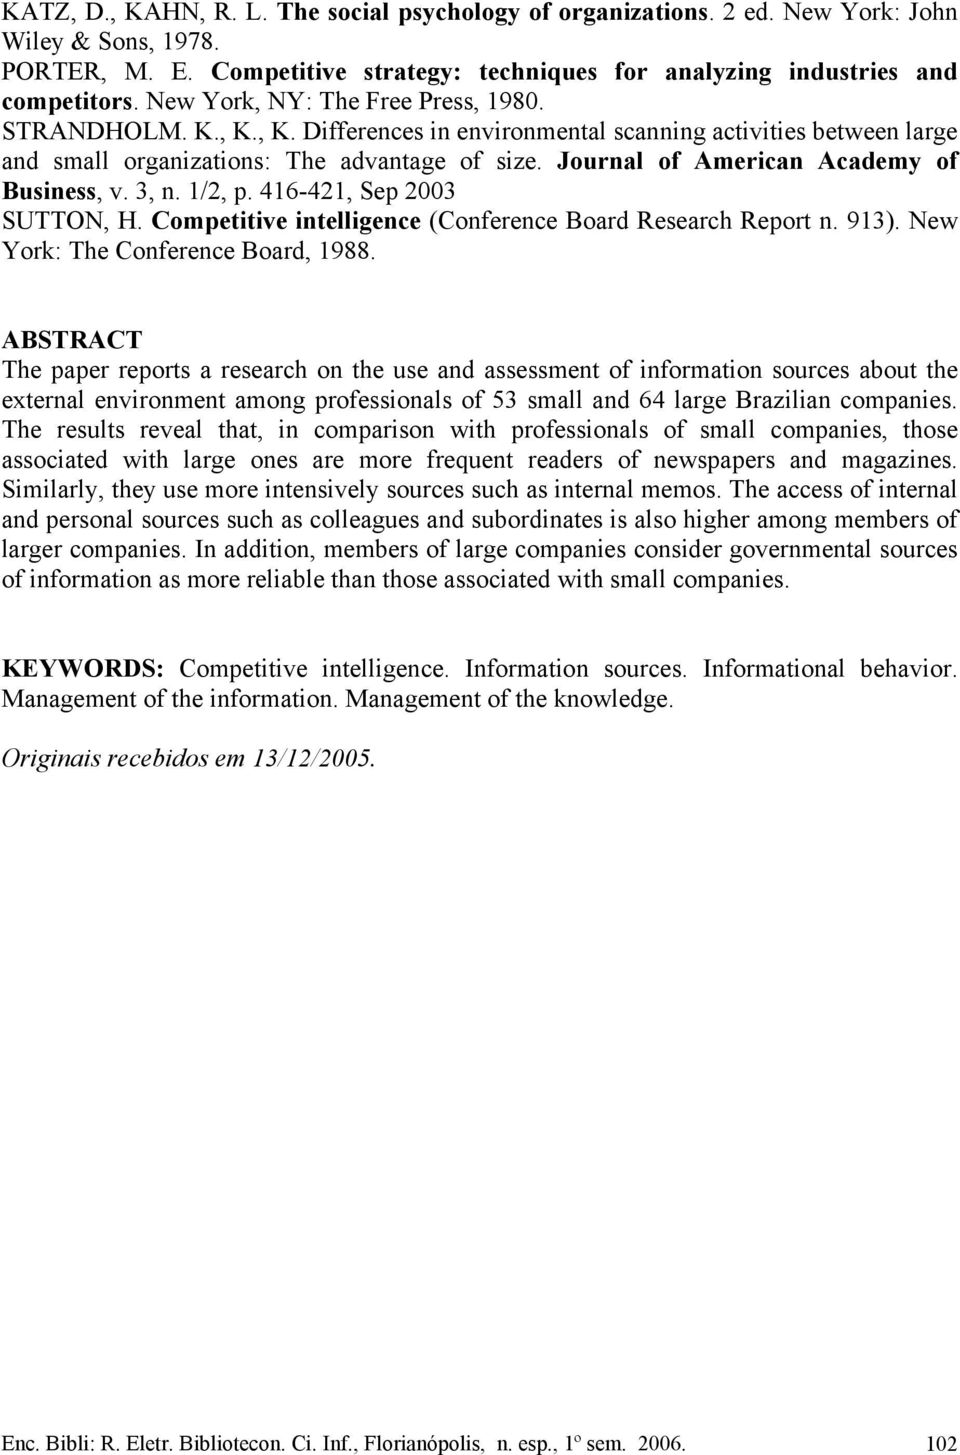 Journal of American Academy of Business, v. 3, n. 1/2, p. 416-421, Sep 2003 SUTTON, H. Competitive intelligence (Conference Board Research Report n. 913). New York: The Conference Board, 1988.